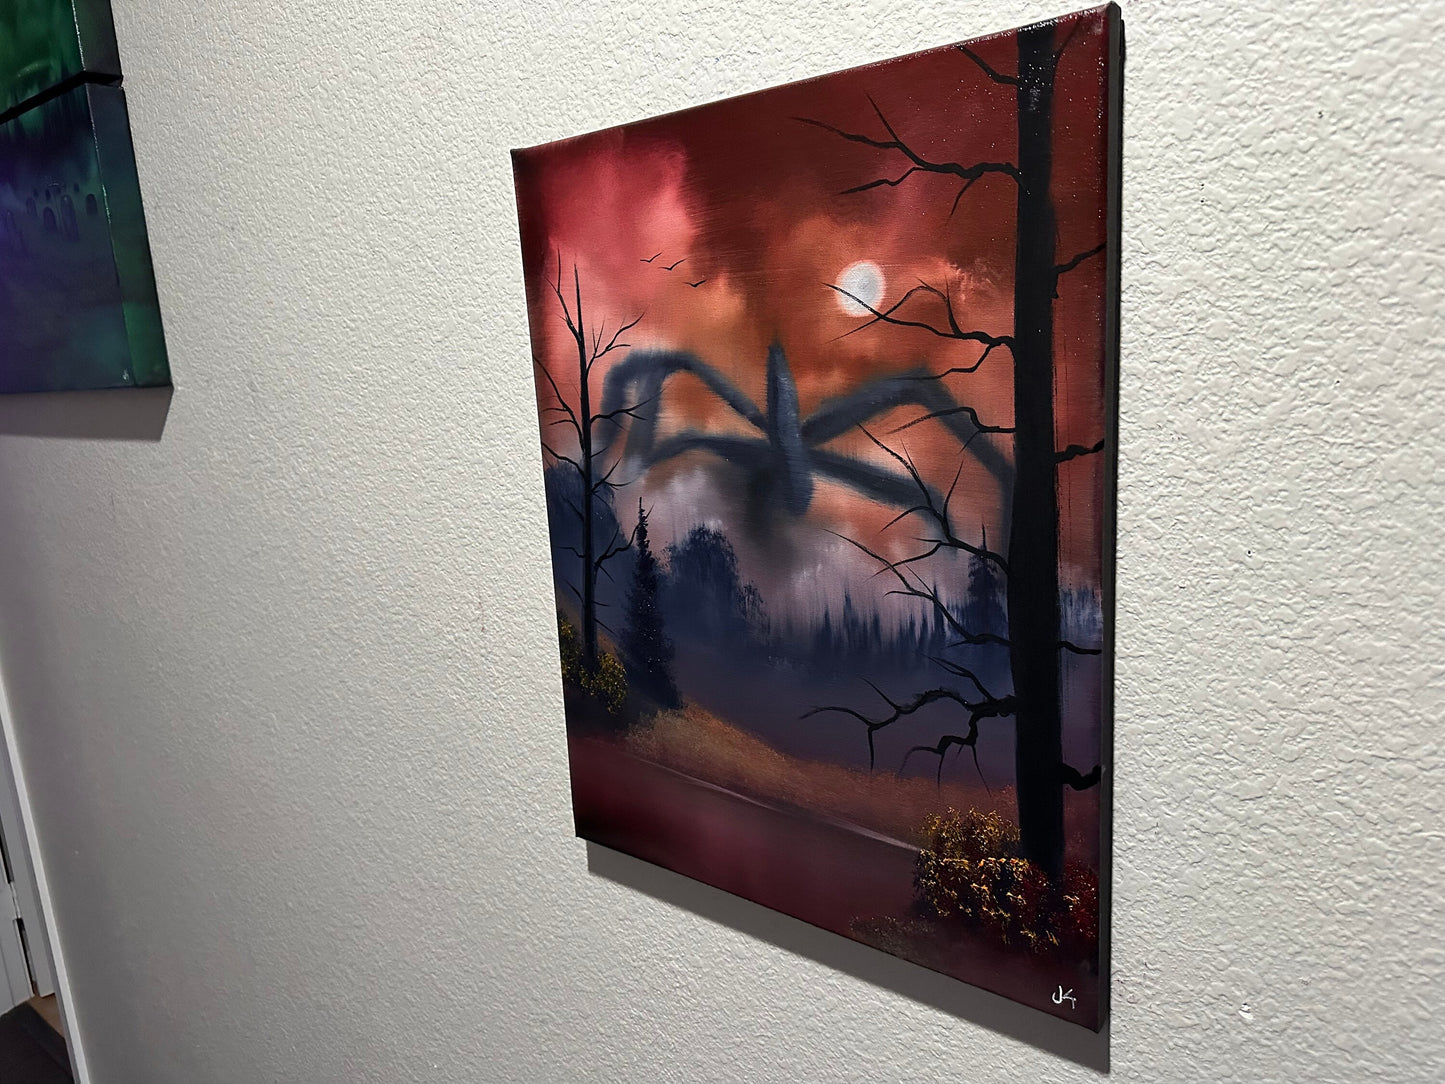 Painting 975 - 16x20" Canvas - Stranger Things inspired Oil Landscape painted Live on TikTok on 10/6/23 by PaintWithJosh